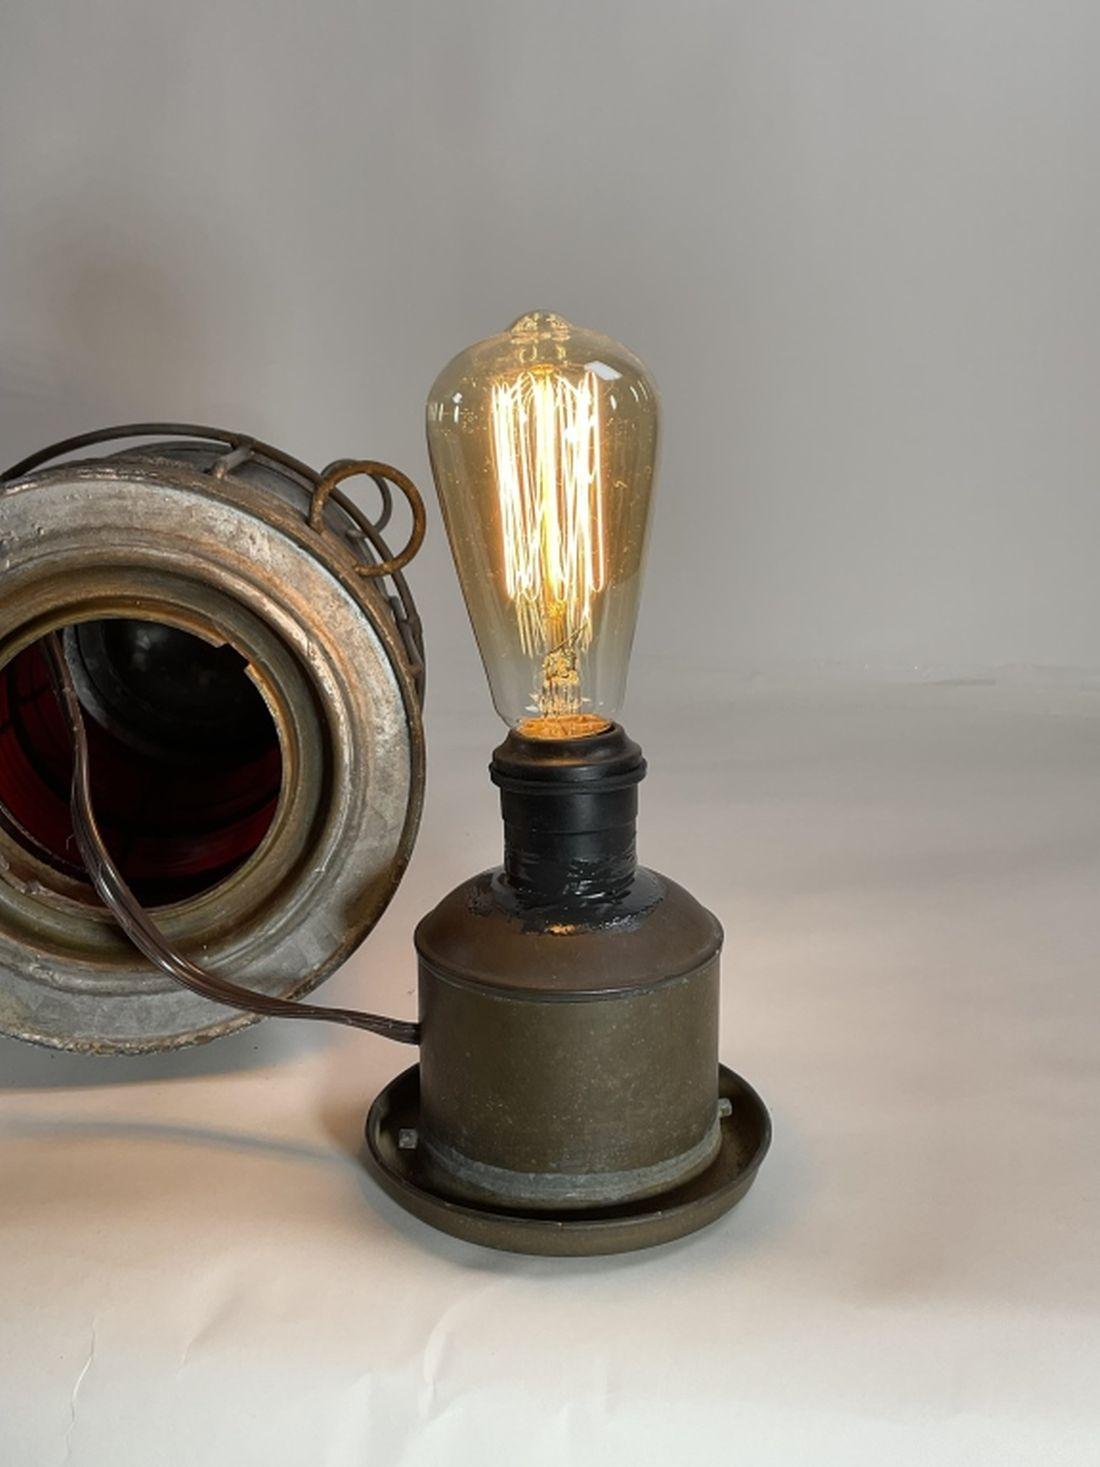 Ships Lantern with Ruby Lens by Perko - Lannan Gallery